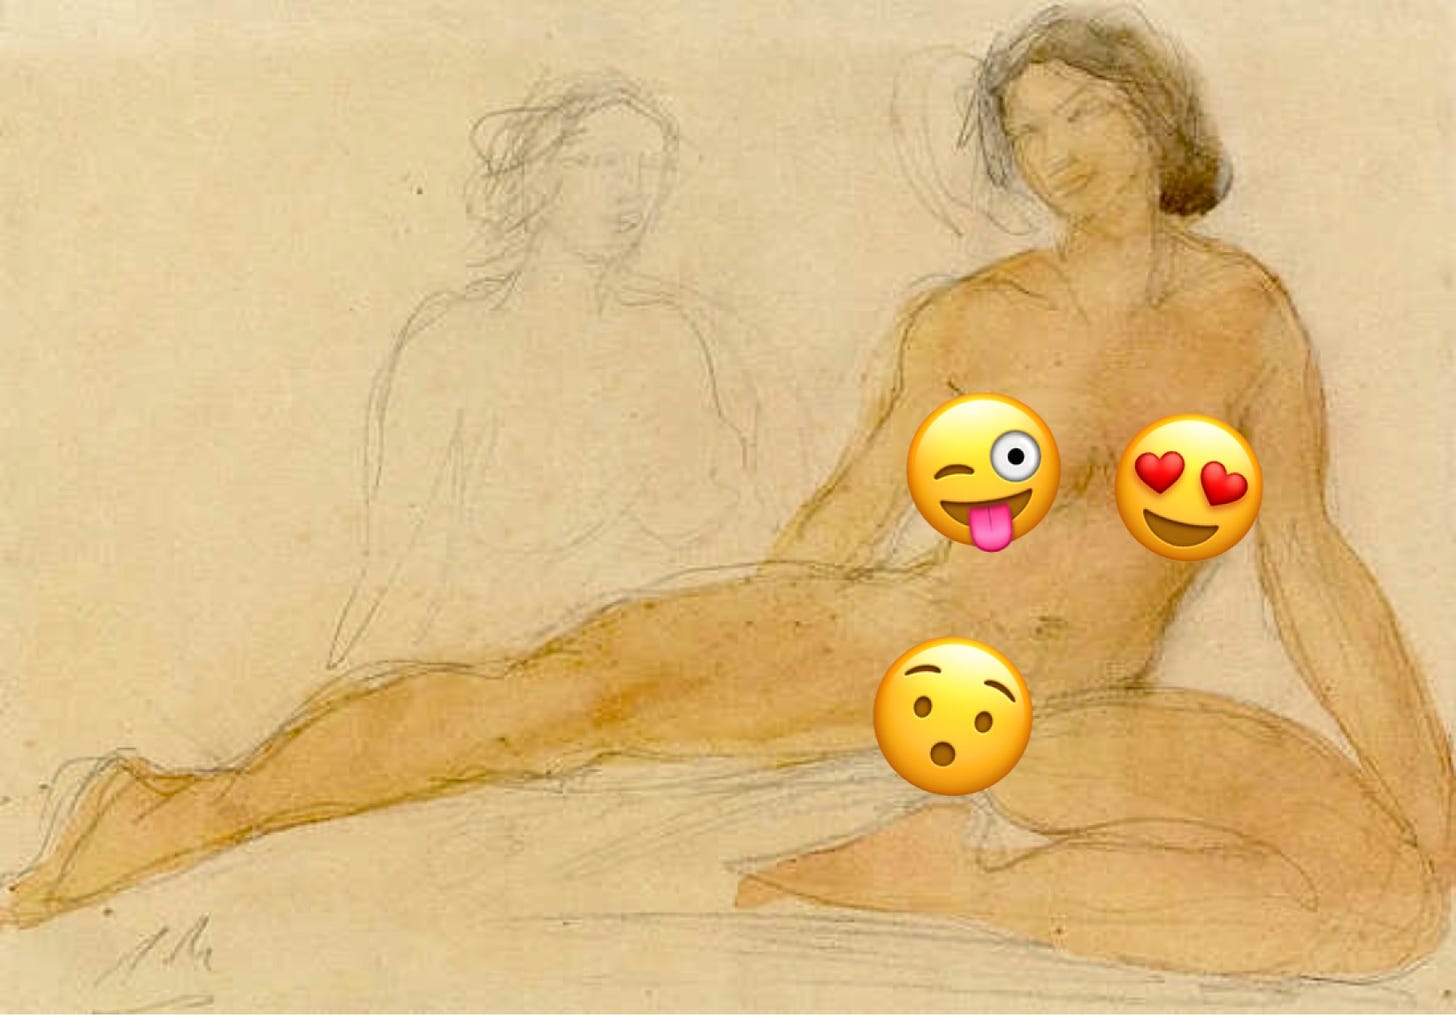 Auguste Rodin's "Two Seated Nudes" censored with smiley face emojis to illustrate the absurdity of social media's double standards around nudity and sex